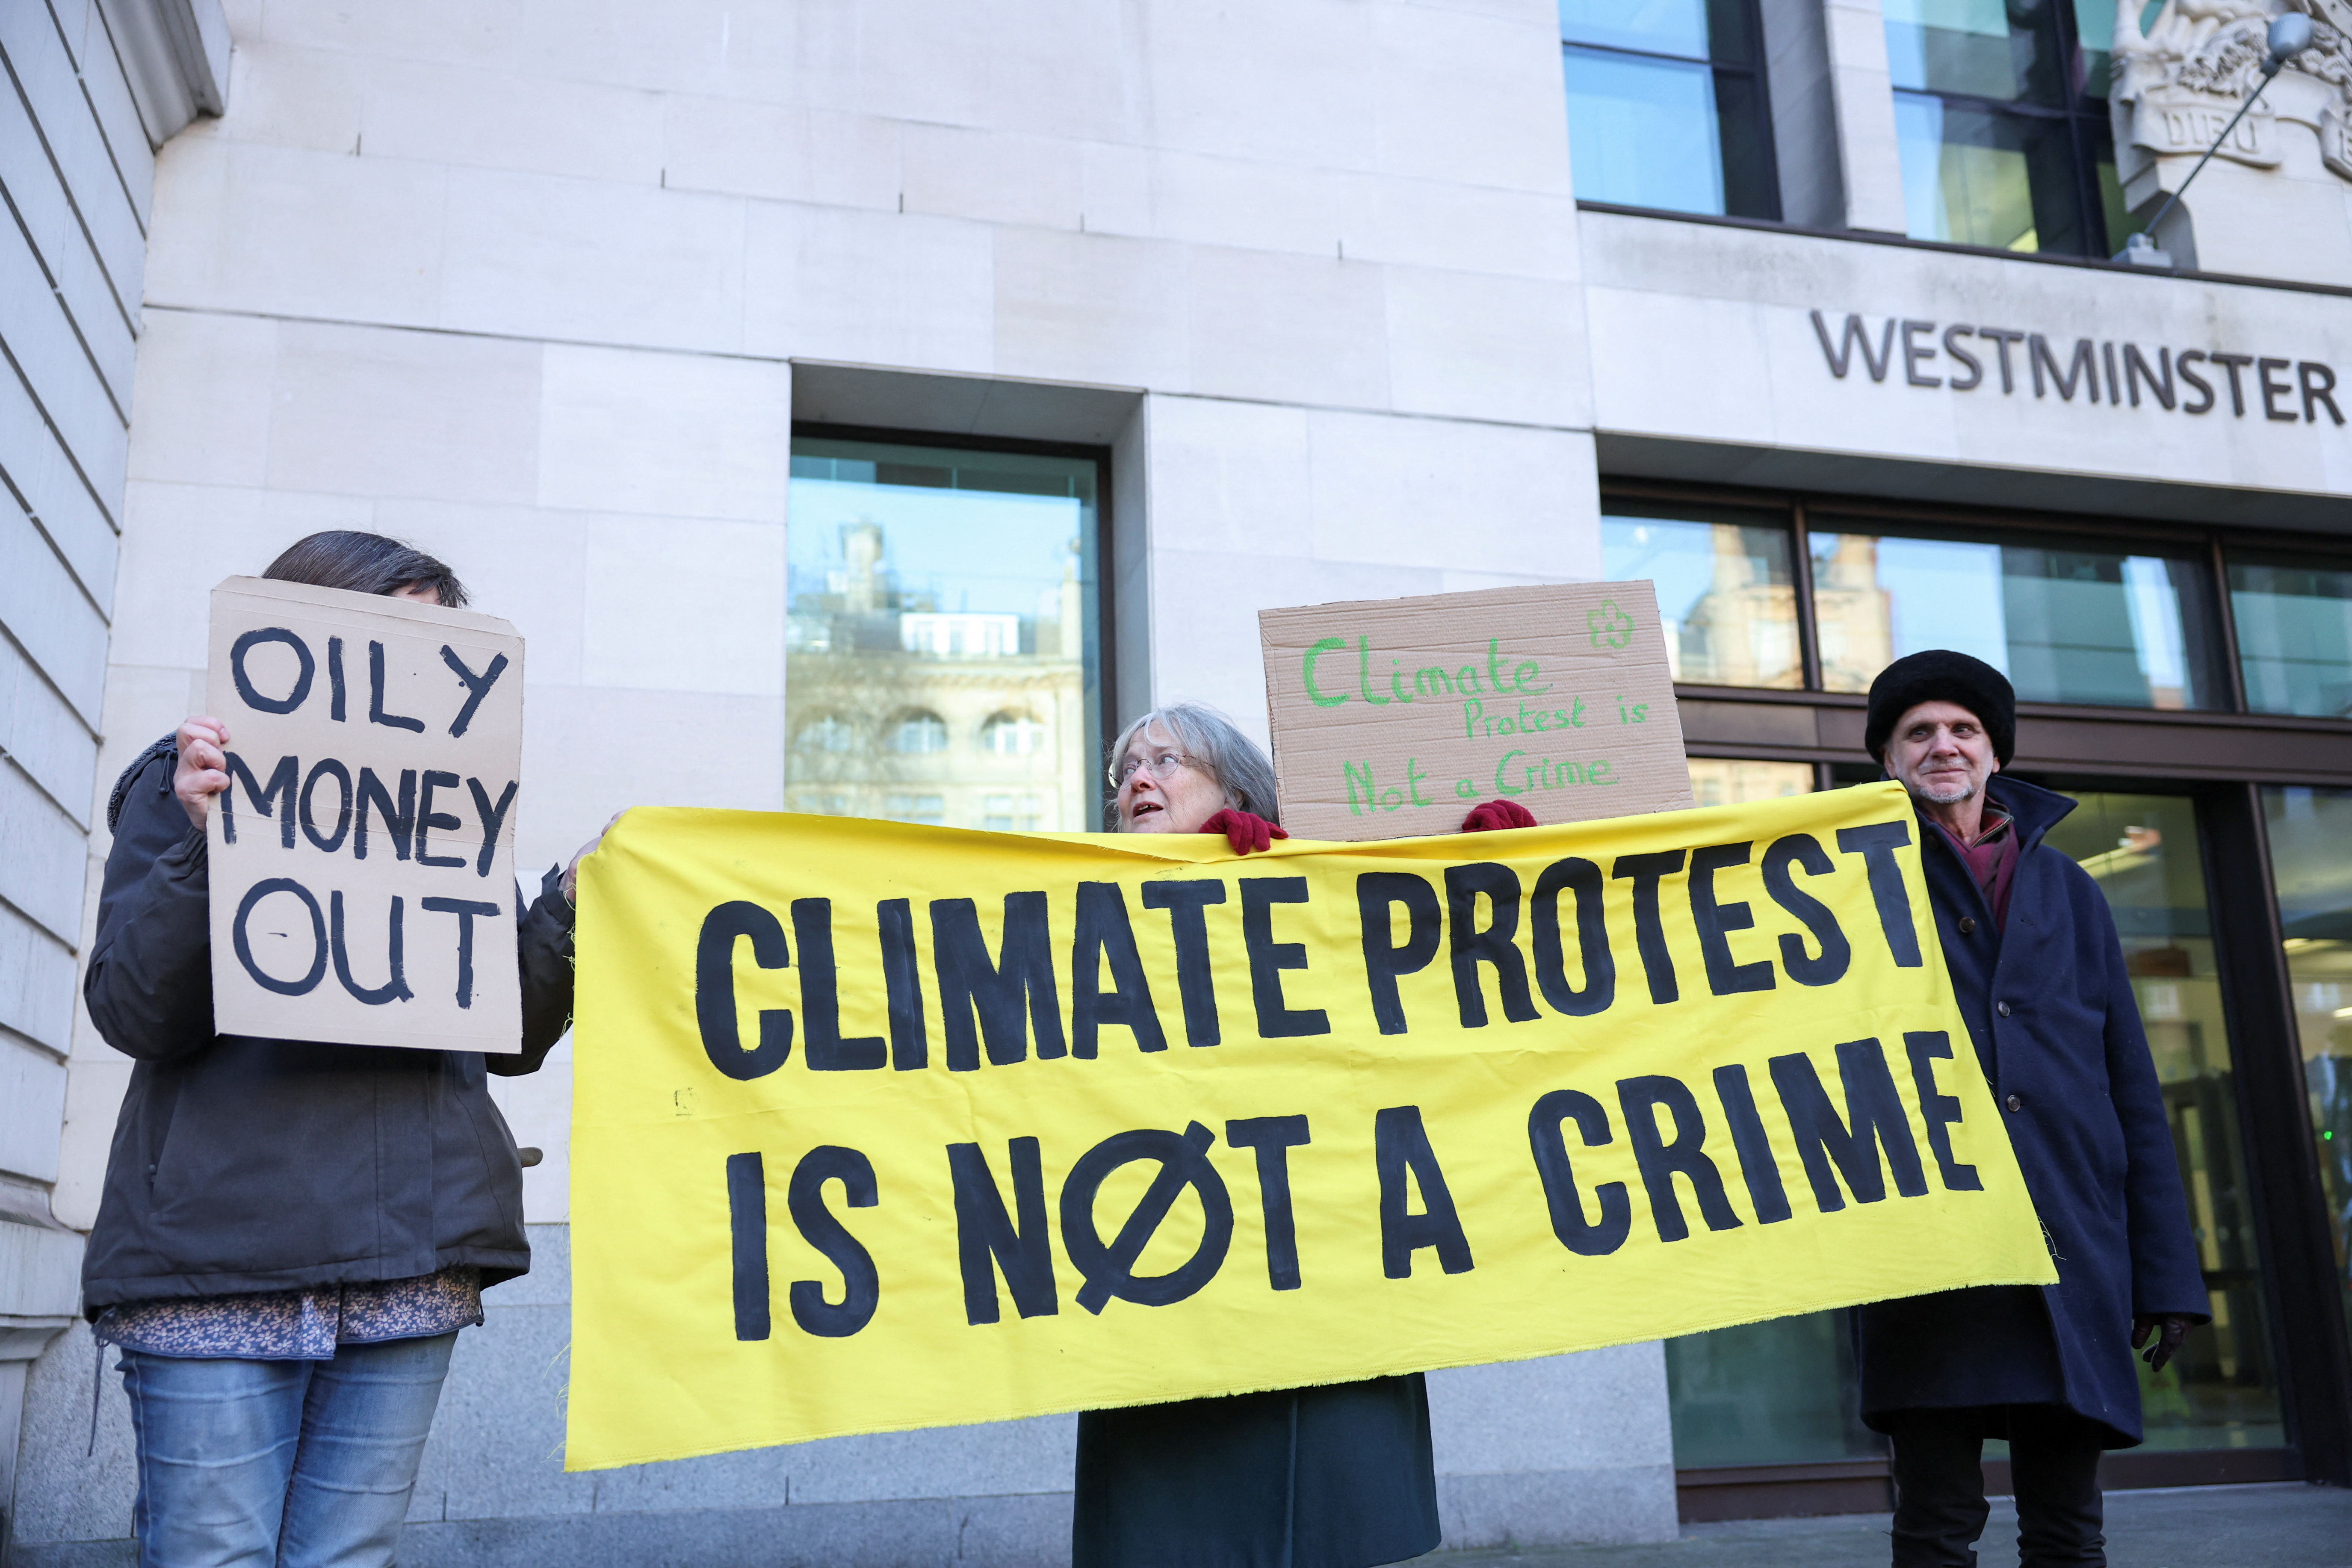 Greta Thunberg's Day in Court: The London Oil Conference Protest Trial - Public and Media Reaction